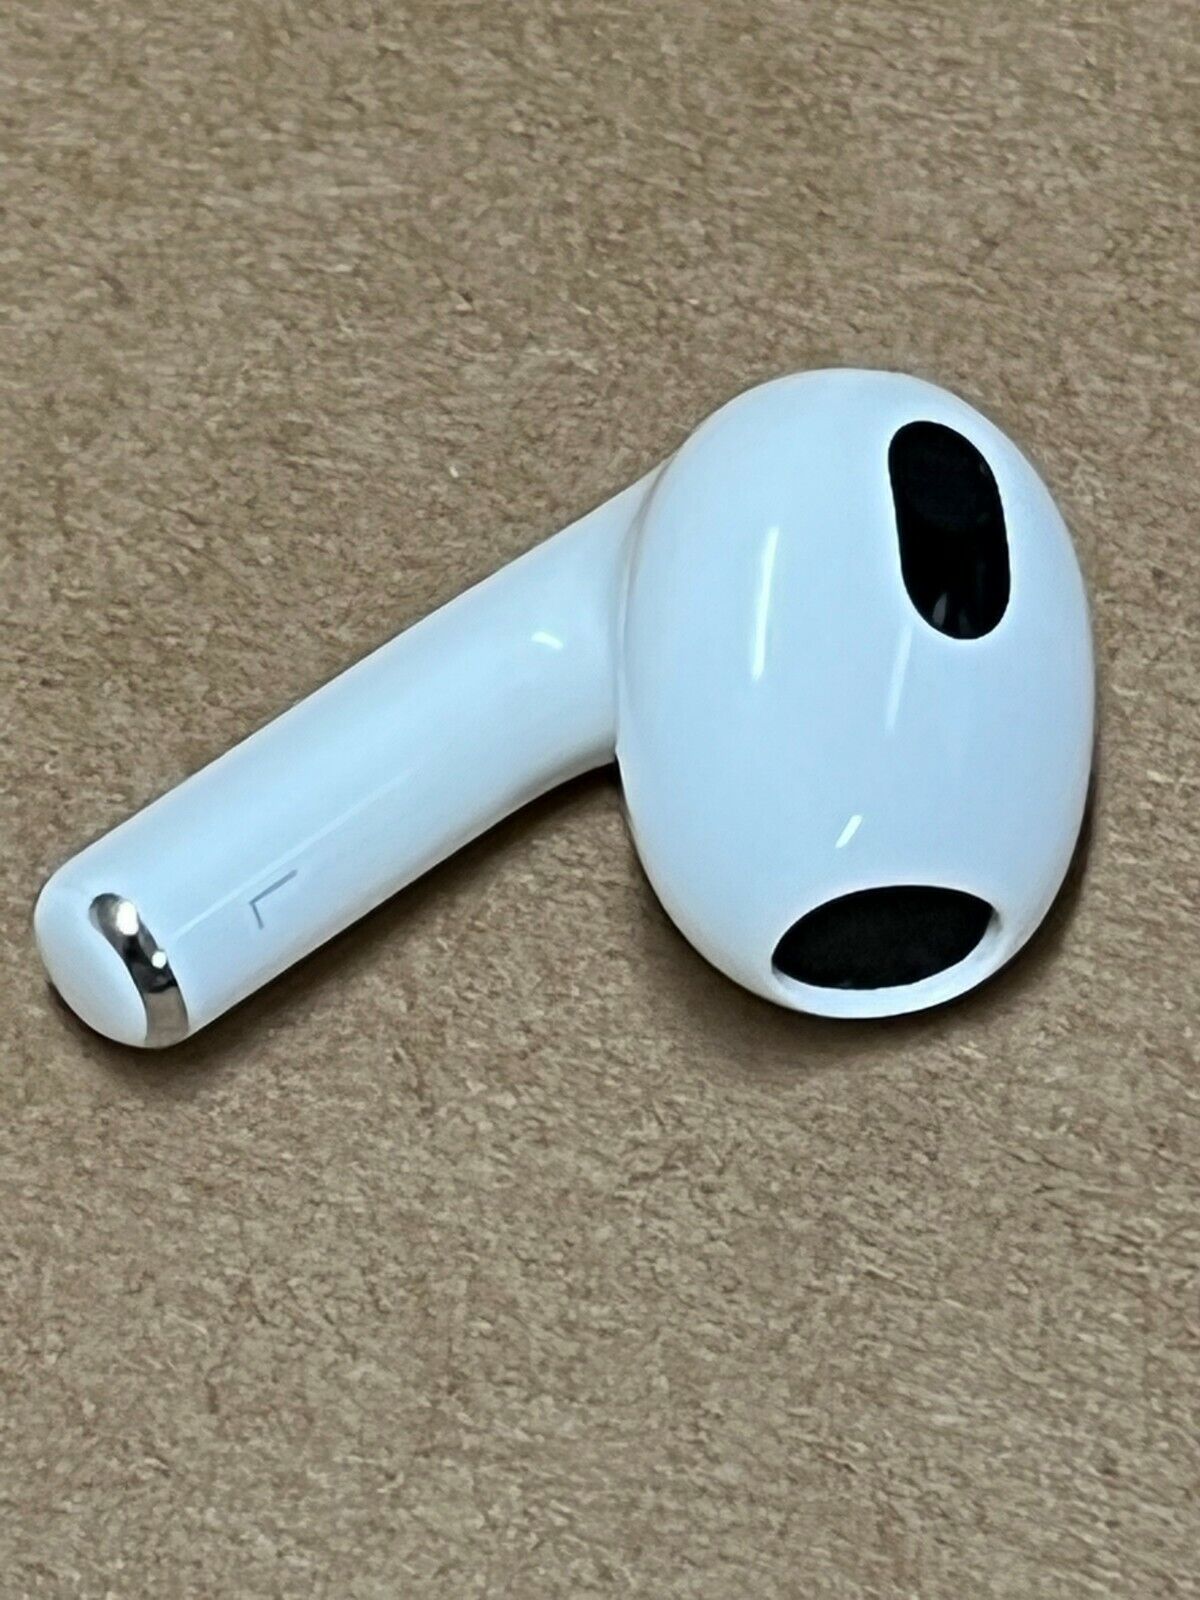 Apple AirPod LEFT ONLY (Airpods) - Replacement - Authentic 3RD GENERATION  A2564